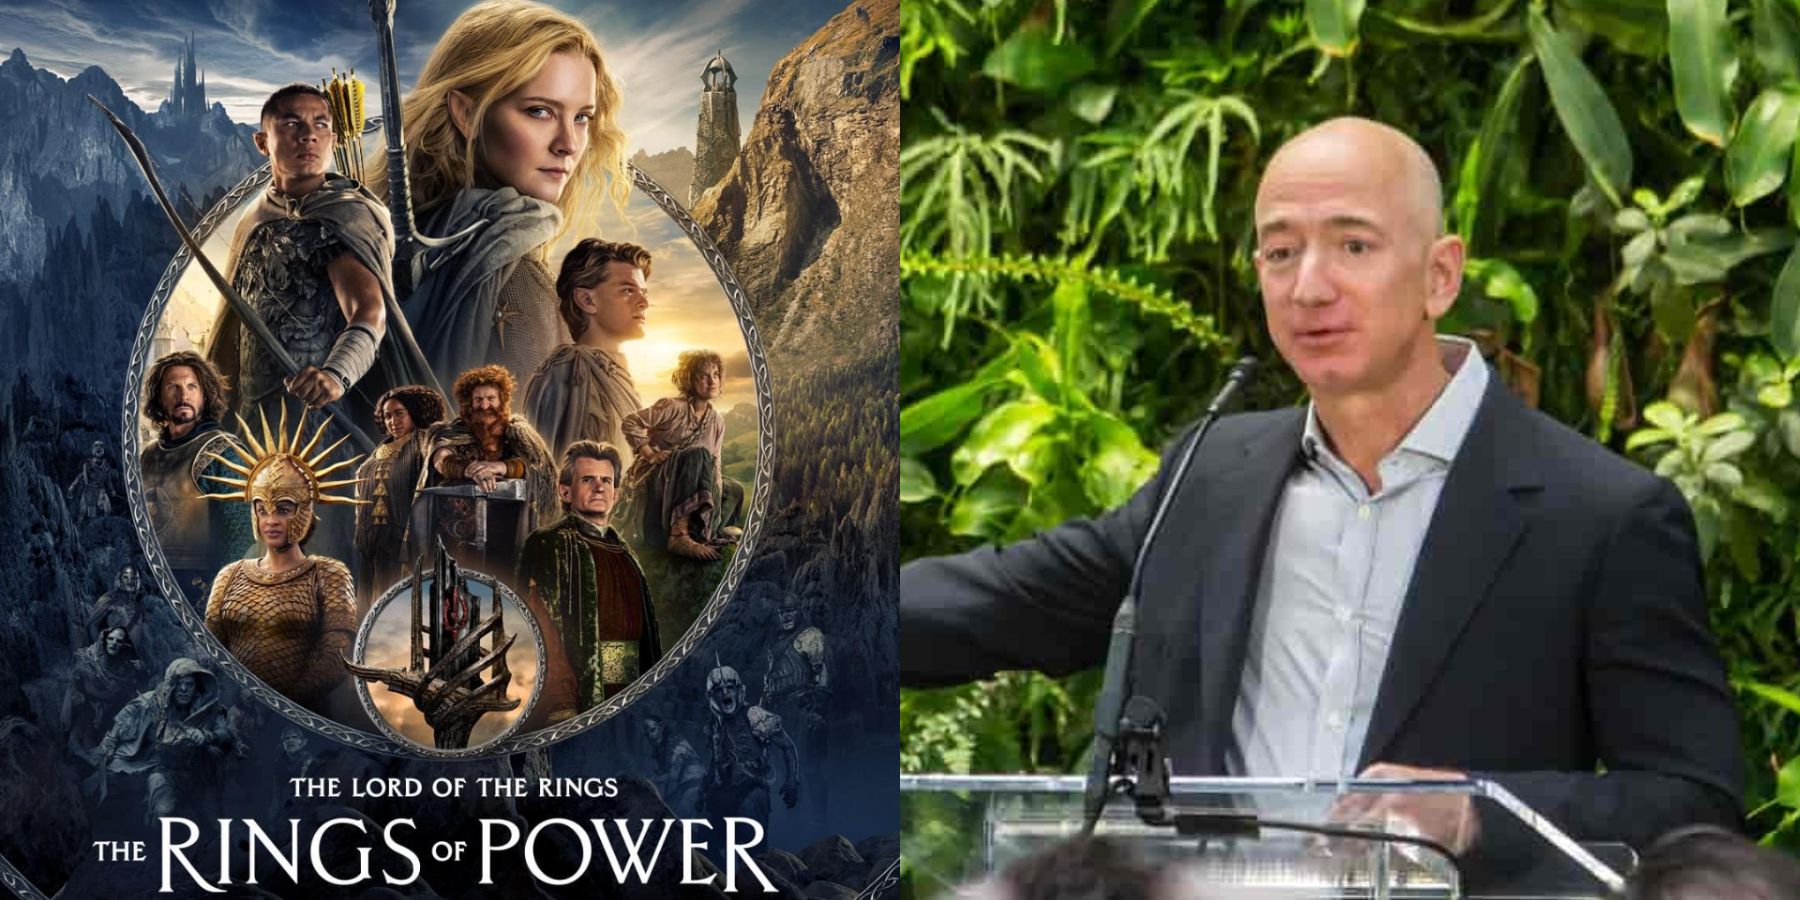 Jeff Bezos and Lord Of The Rings Poster (1)